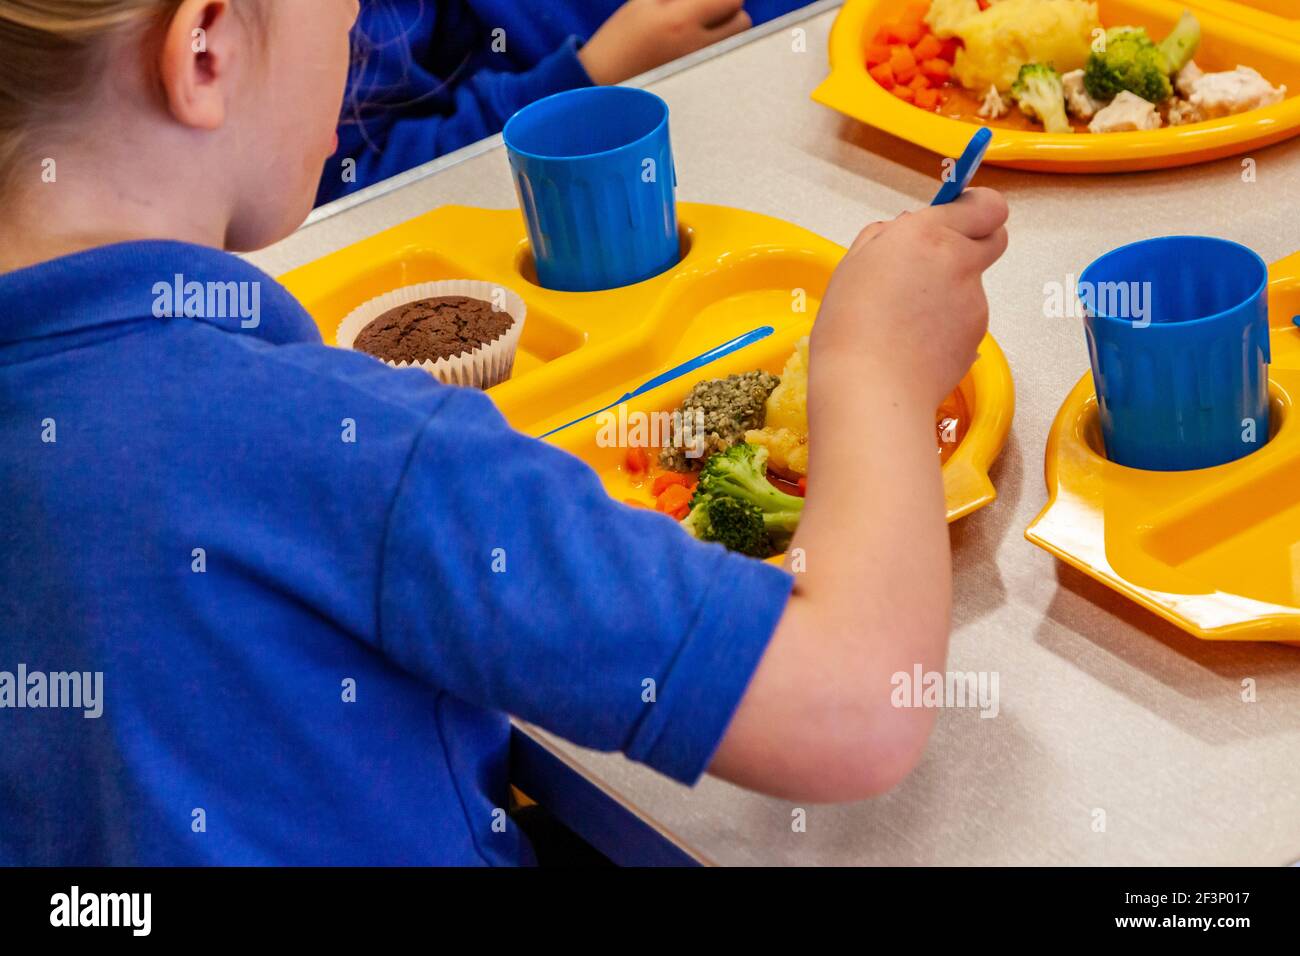 Children at a primary school eating school dinner using plastic plates, cups and cutlery. Stock Photo